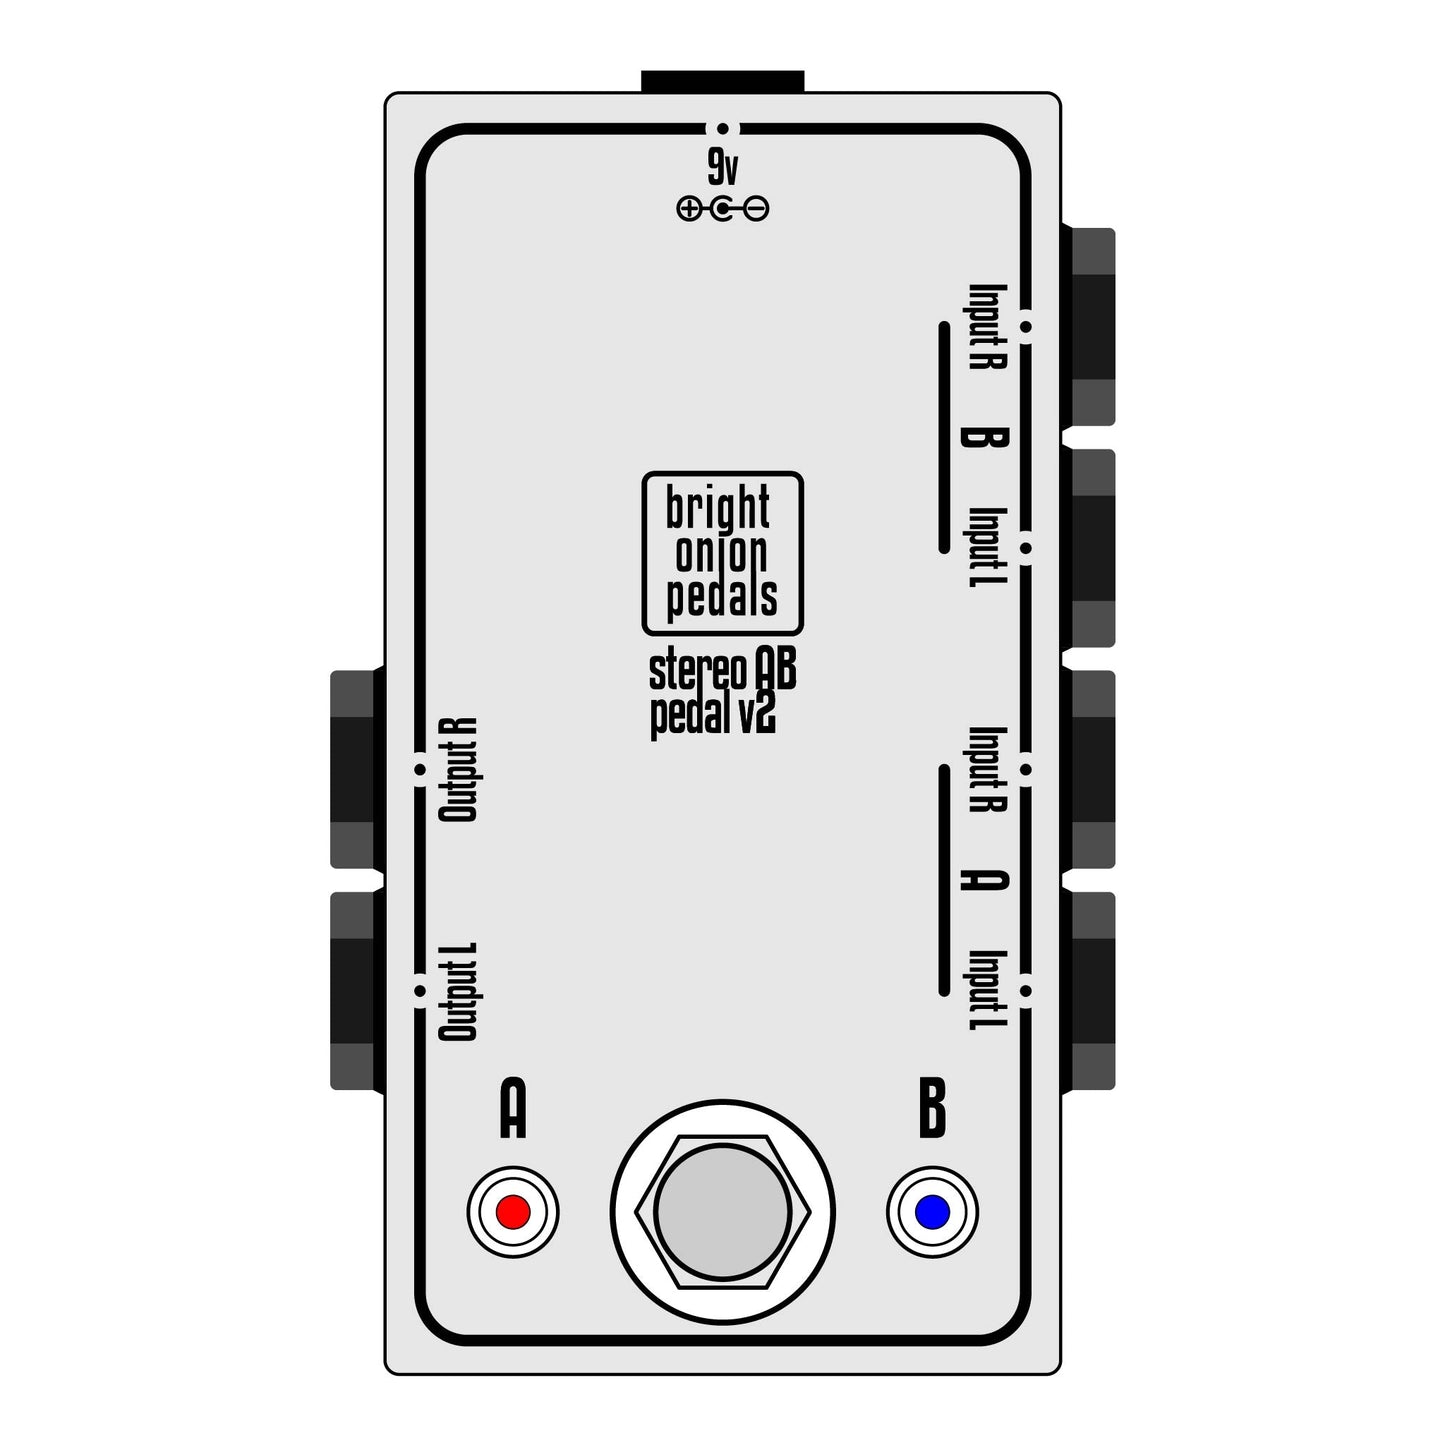 Stereo AB Input Switch v2 - Bright Onion Pedals